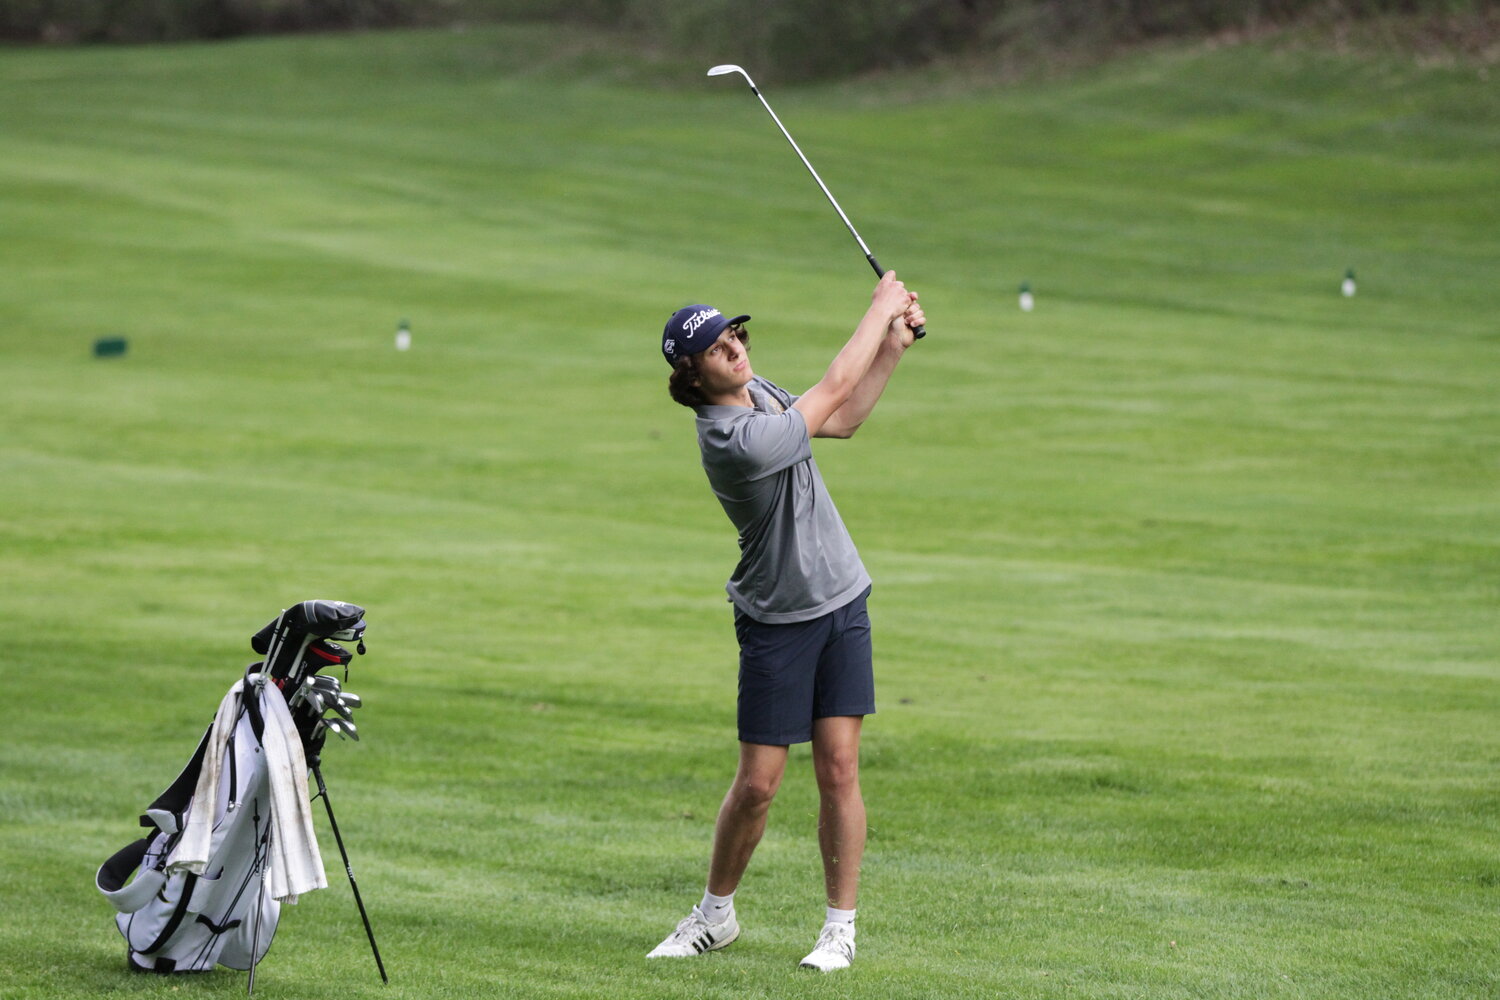 River Falls junior Will Benedict hits a wedge from just off the fairway during a home meet earlier this year. Benedict shot a level-par round of 72 at the Division 1 regional at the Wild Ridge Golf Course in Eau Claire on Tuesday, May 23.